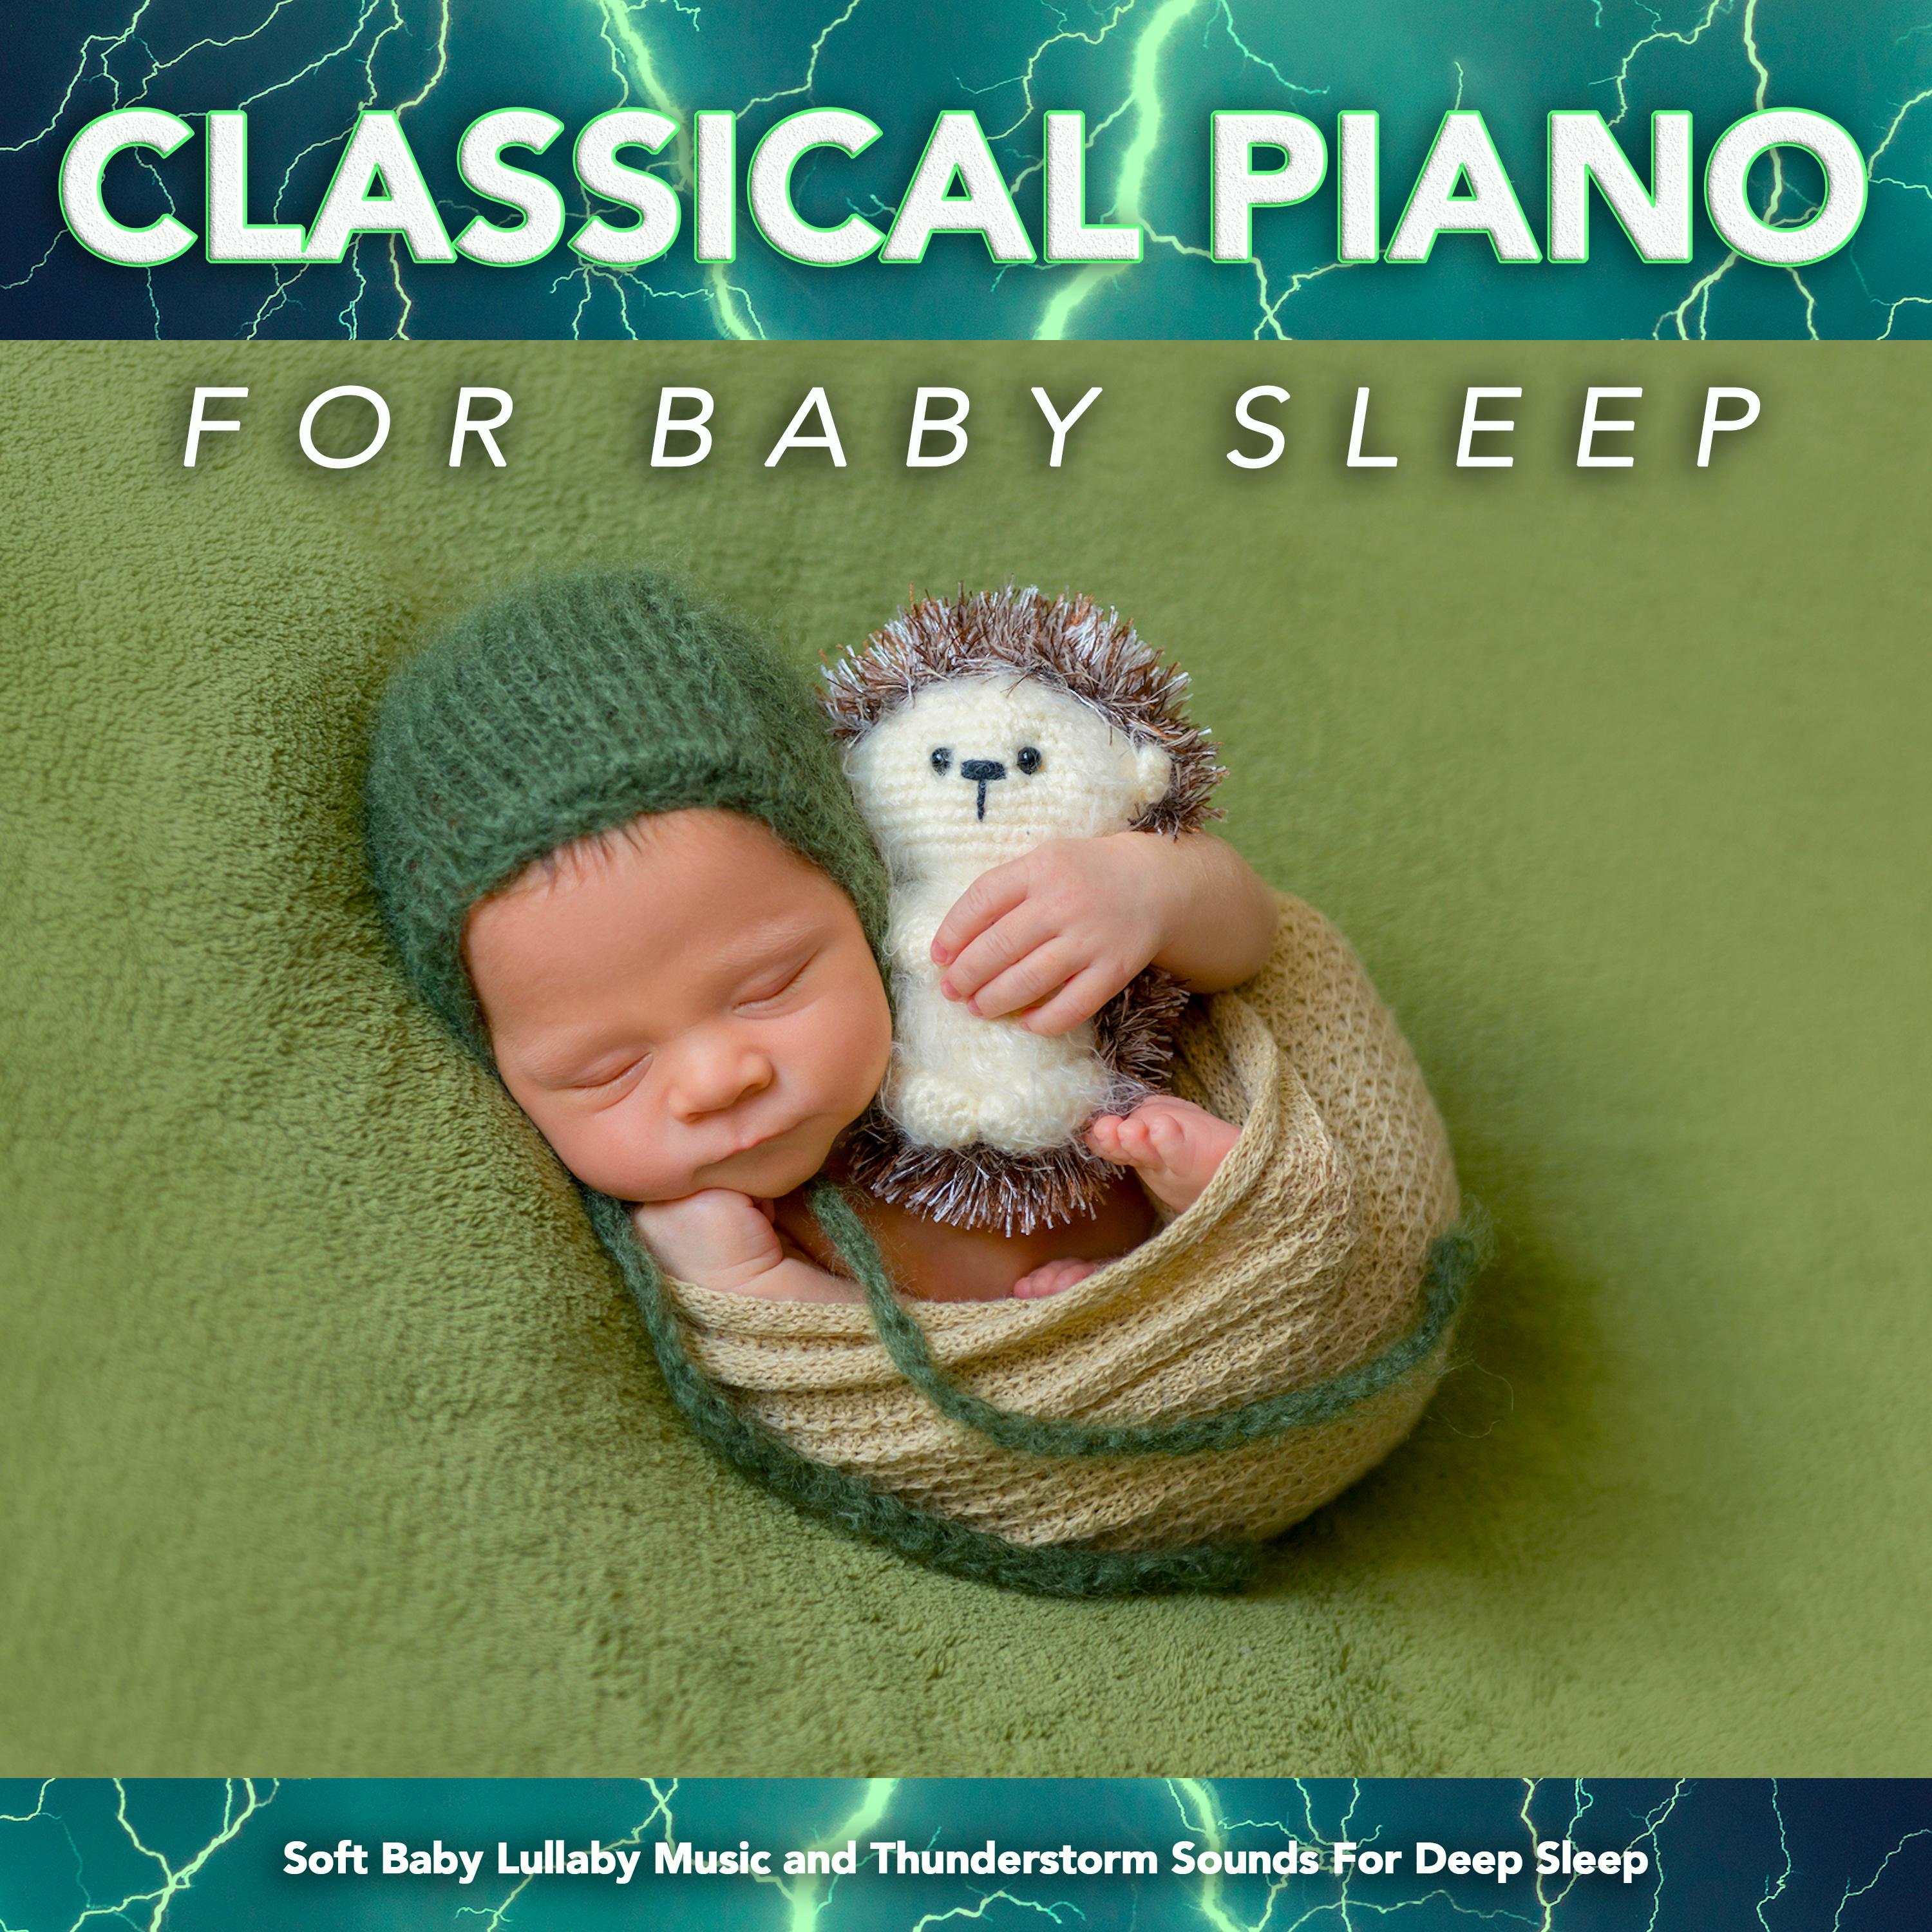 Song Without Words - Mendelssohn - Soft Baby Lullaby Music - Thunderstorm Sounds - Classical Piano for Baby Sleep